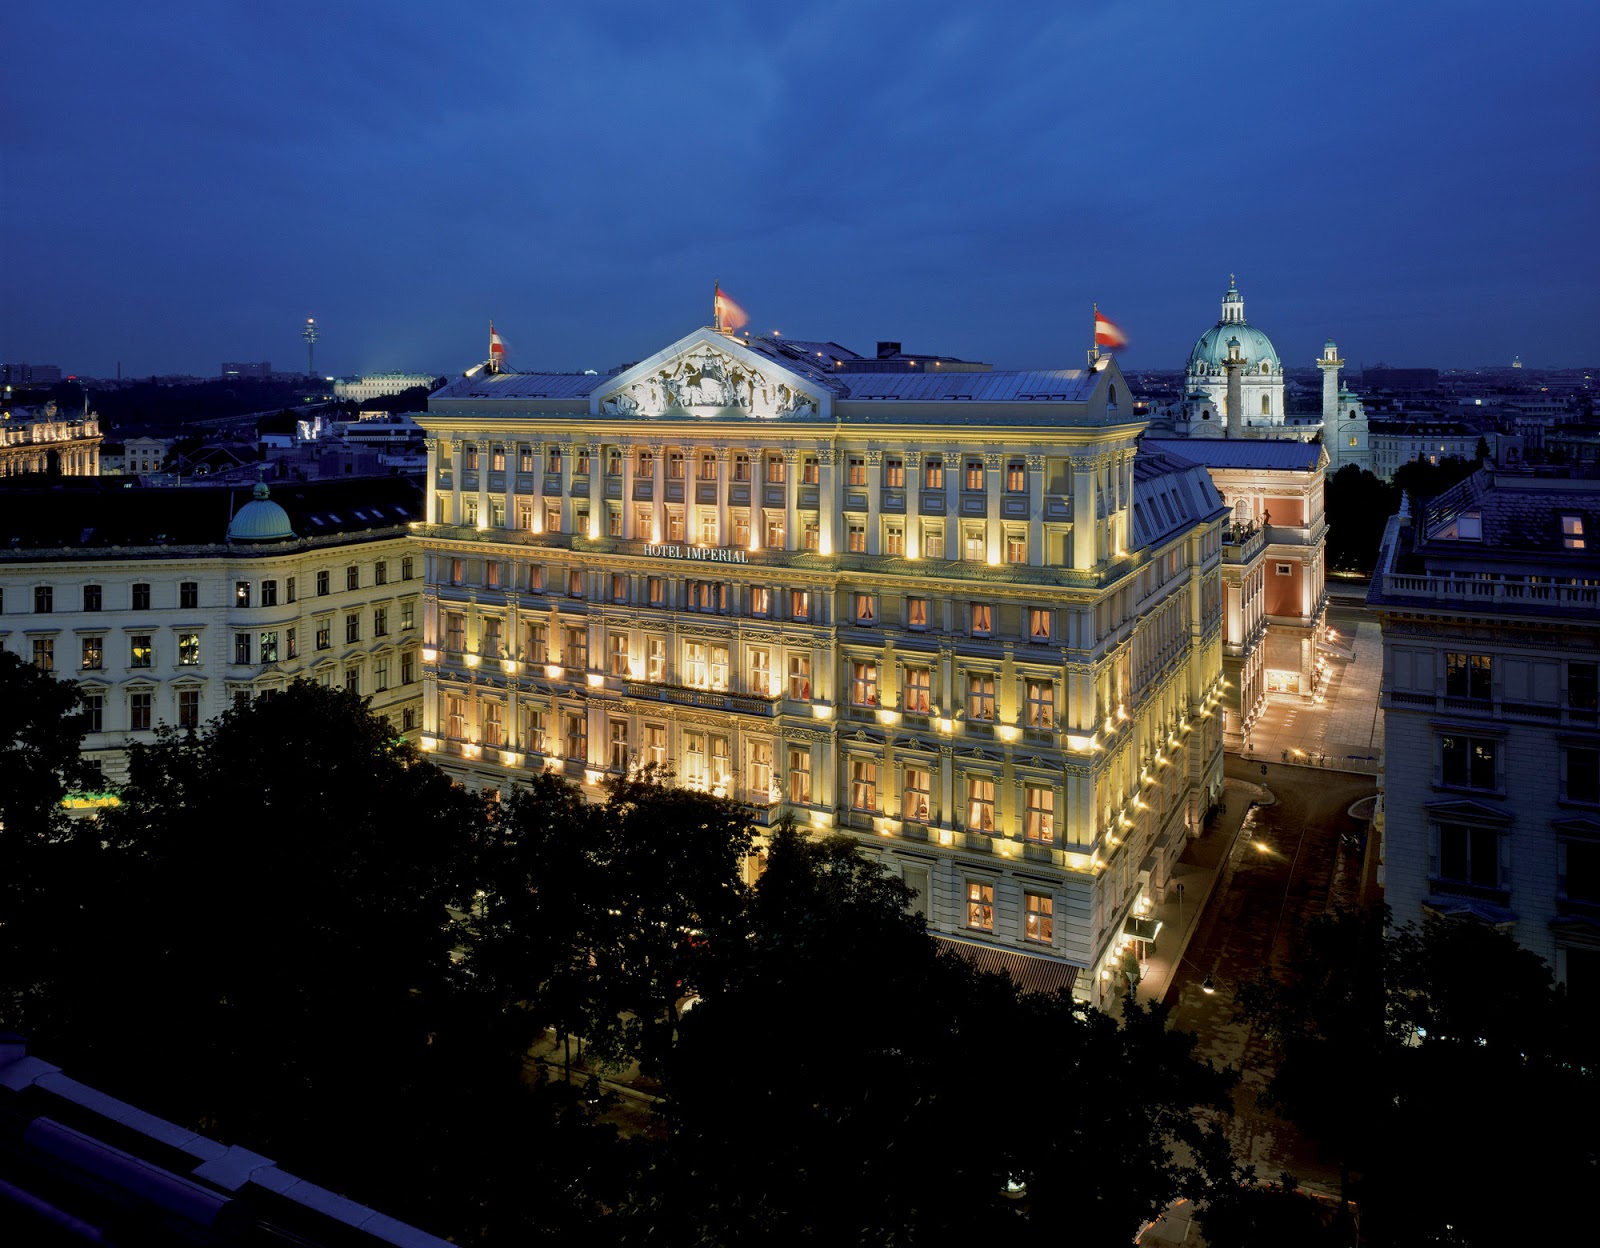 Passion For Luxury Hotel Imperial Vienna “magnificent Discreet And Elegant”